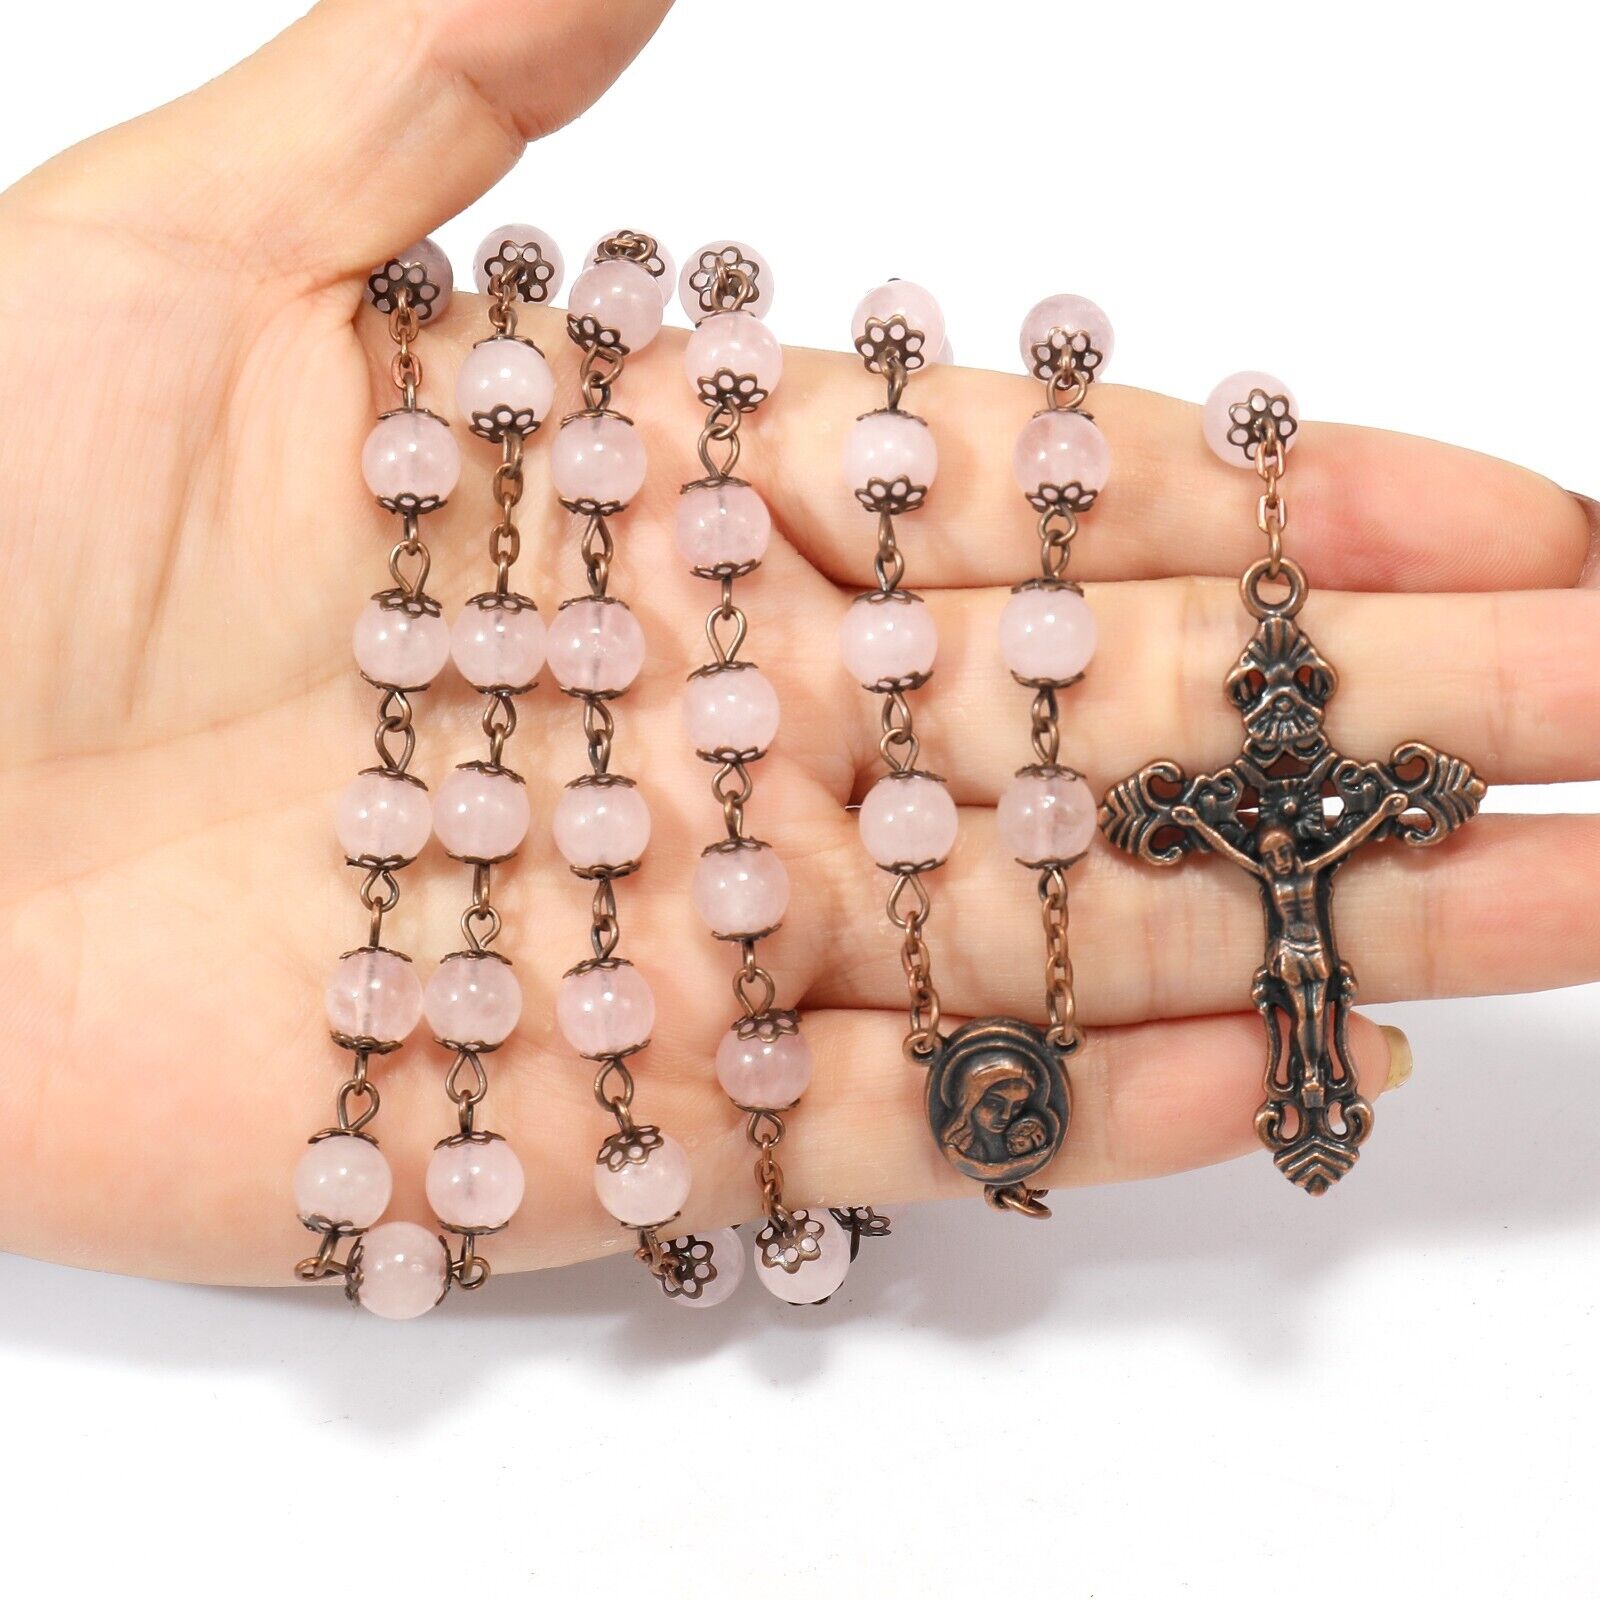 Rose Quartz Natural Stone Rosary Beads Necklace Holy Soil & Cross Crucifix Nazareth Store